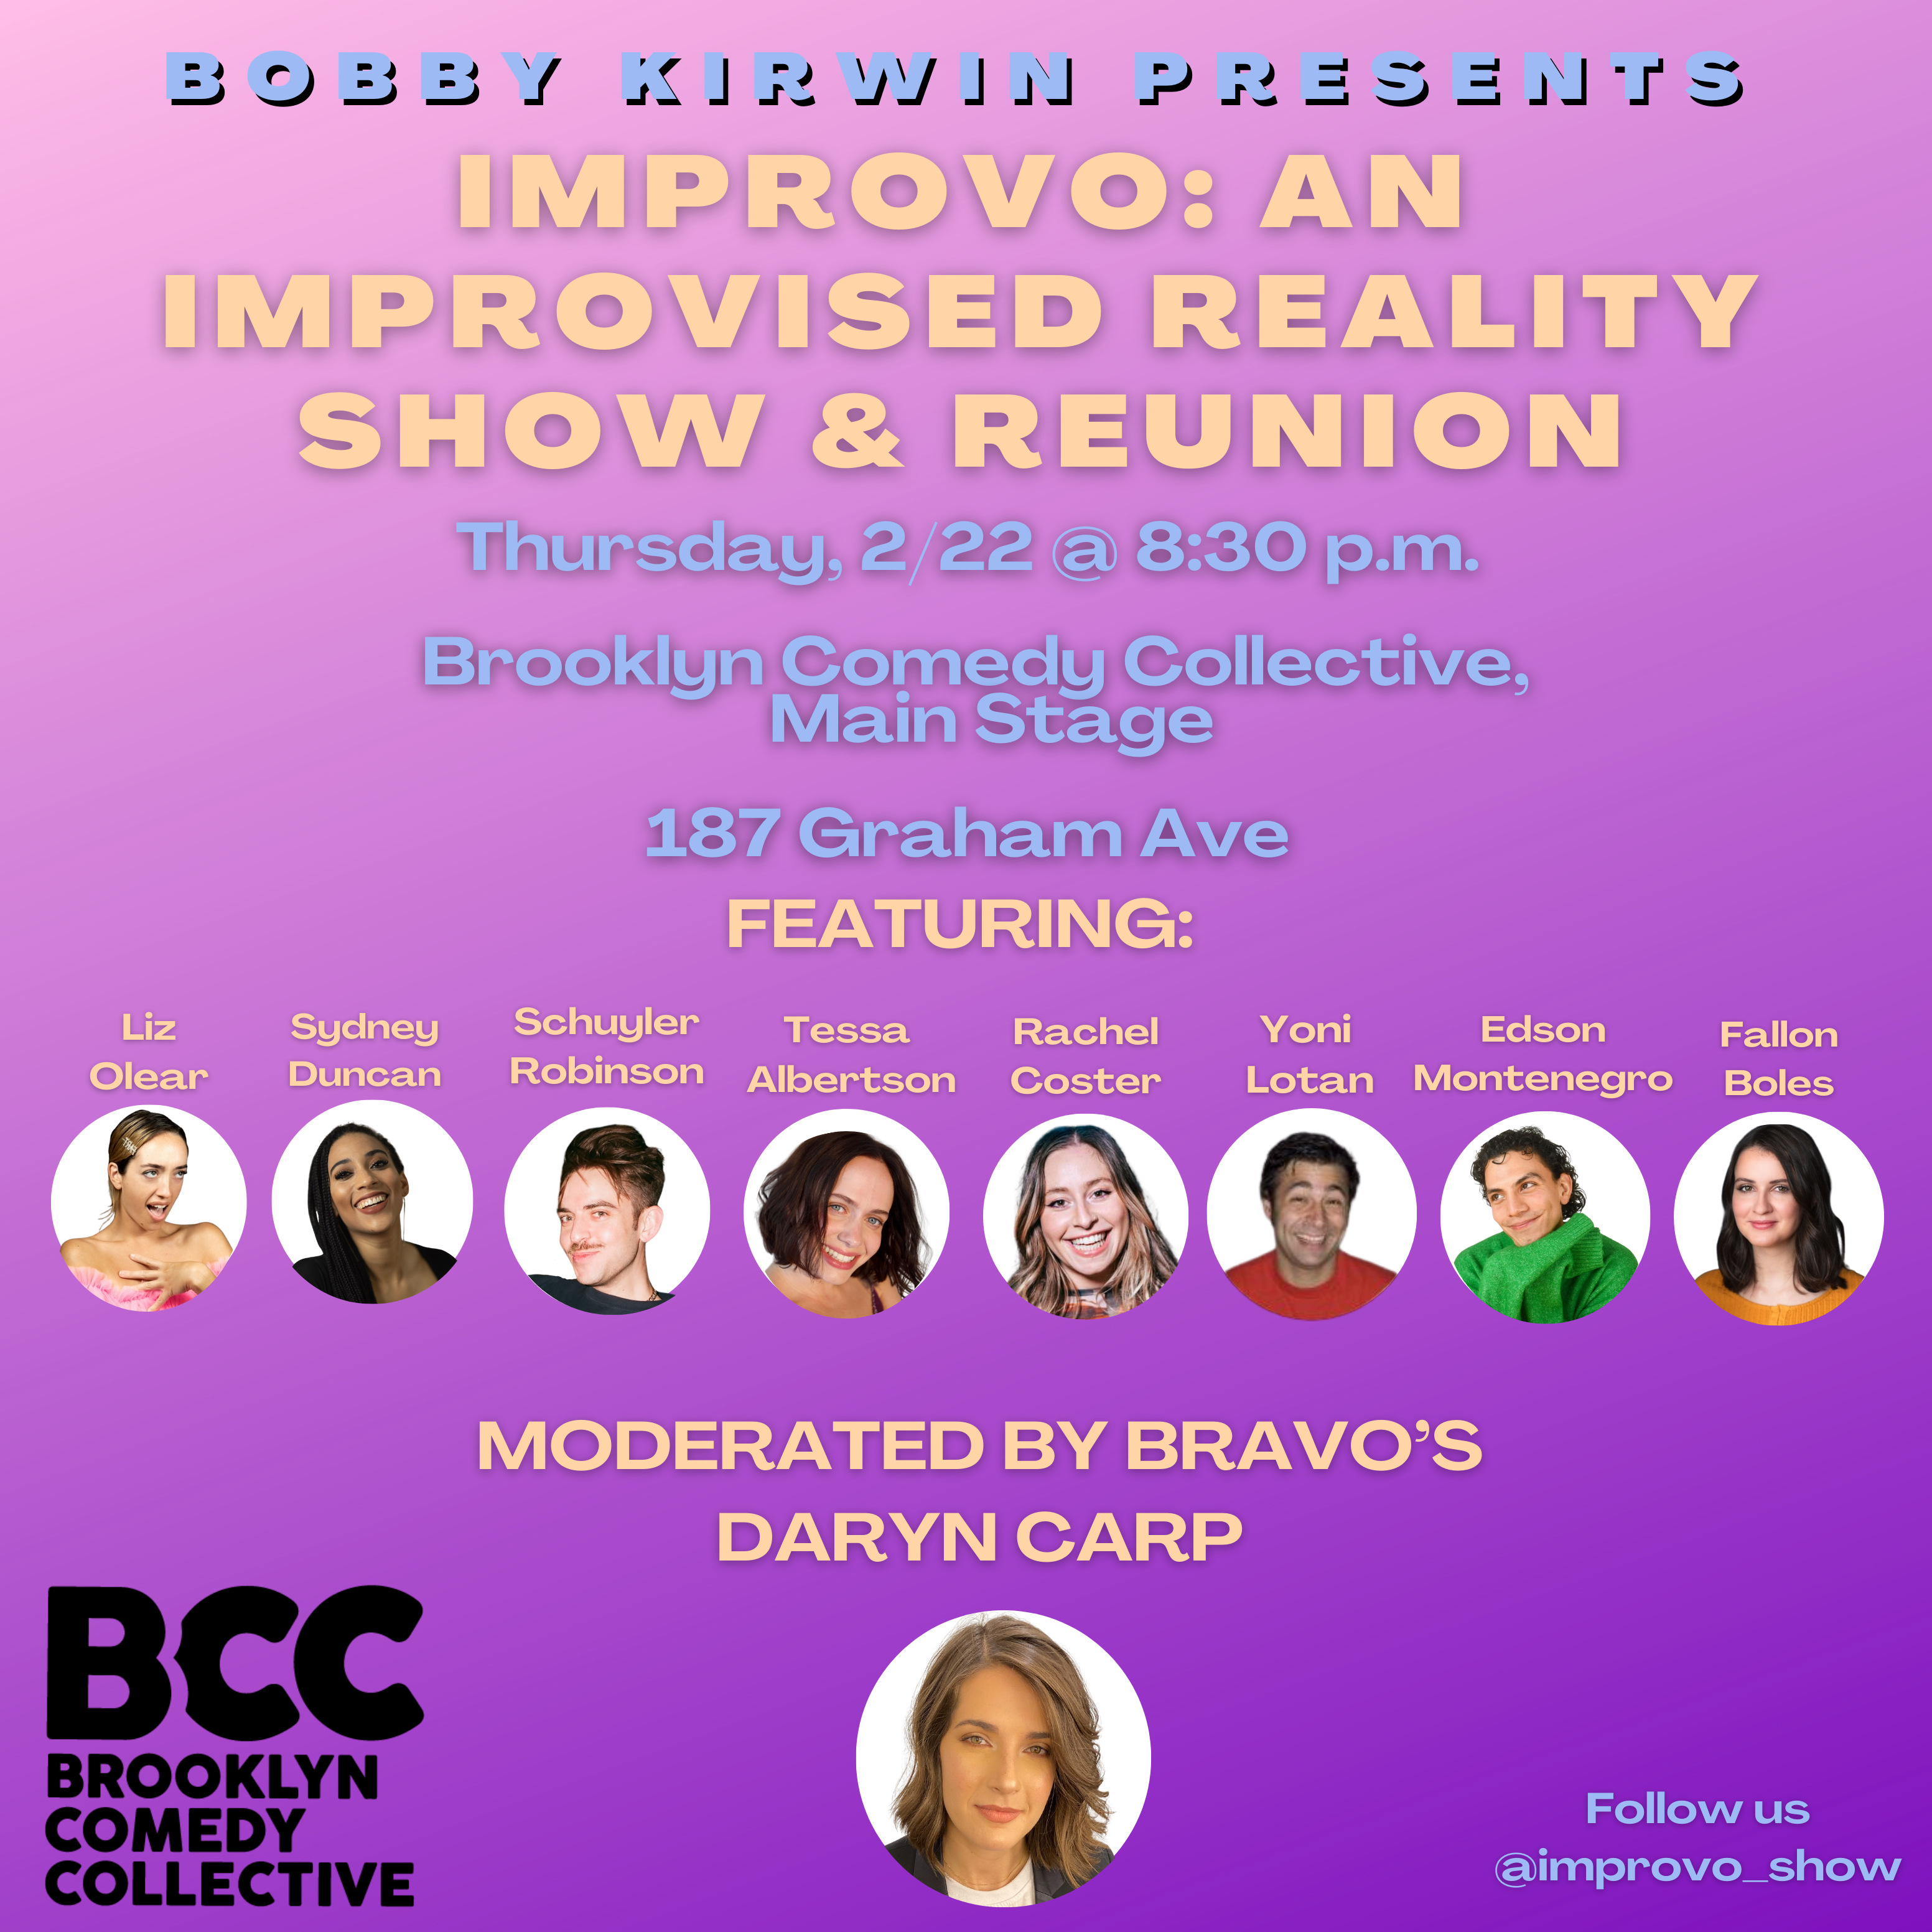 Improvo: An Improvised Reality Show & Reunion to Premiere at The Brooklyn Comedy Collective 